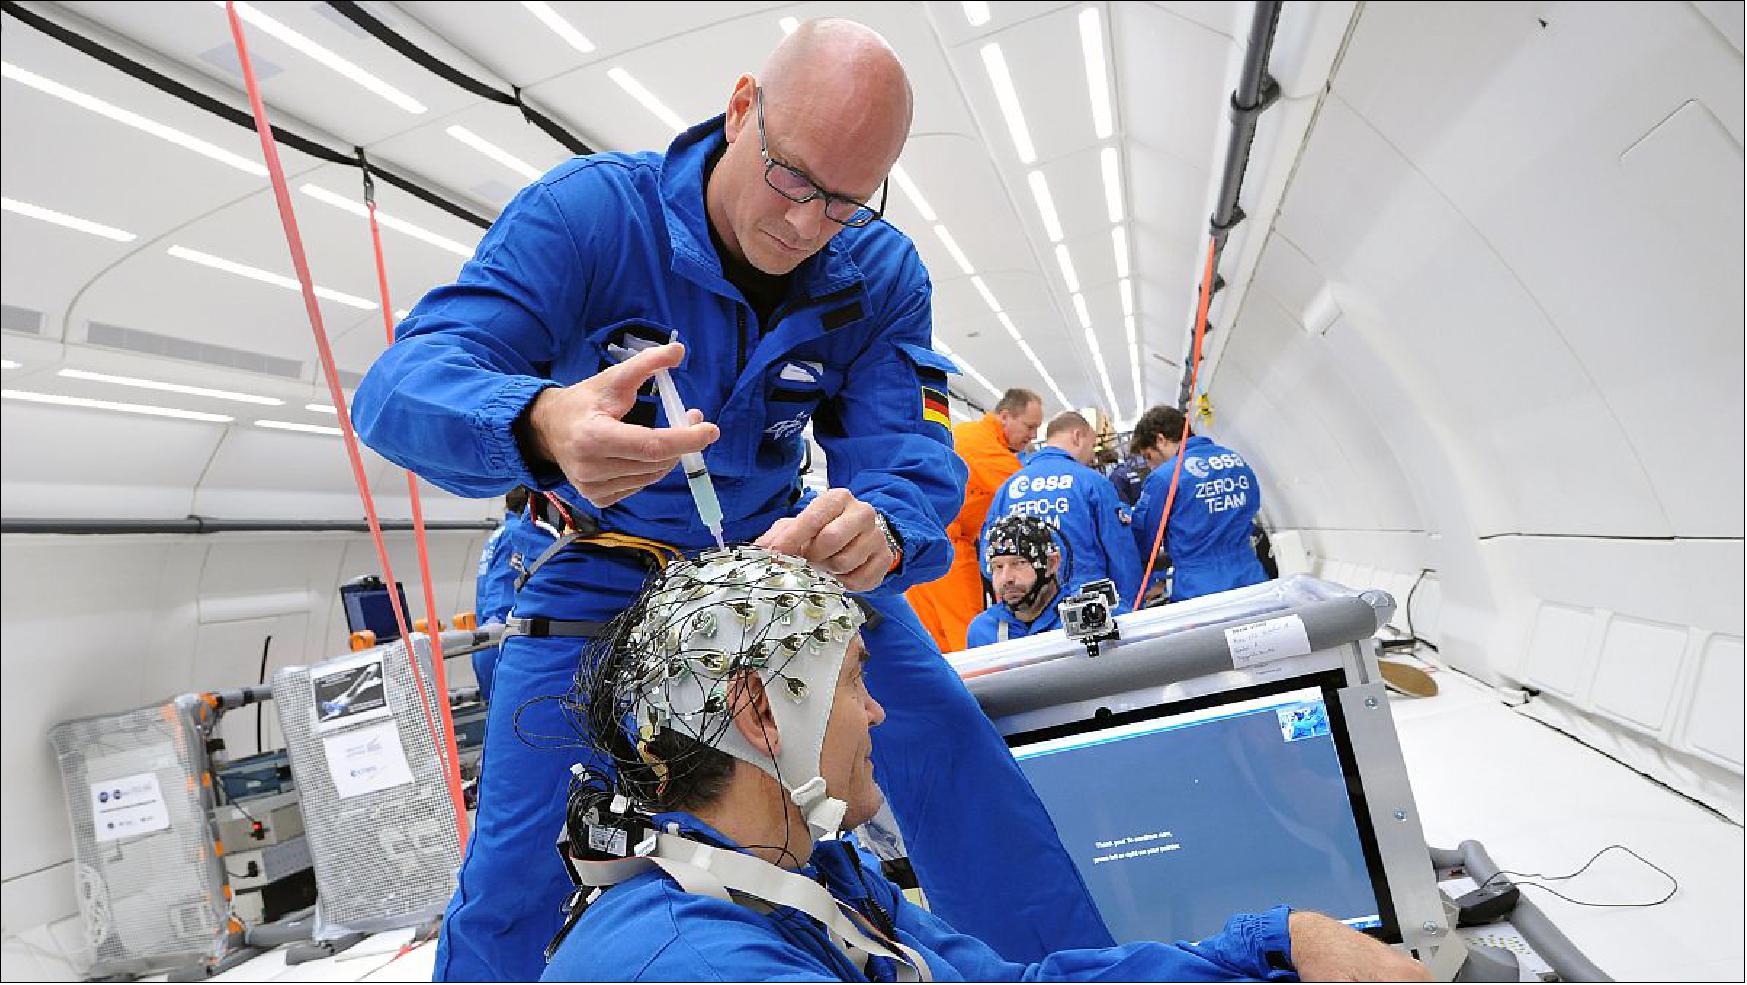 Figure 41: Photo showing the preparations for a human physiology experiment for a parabolic flight (image credit: DLR)